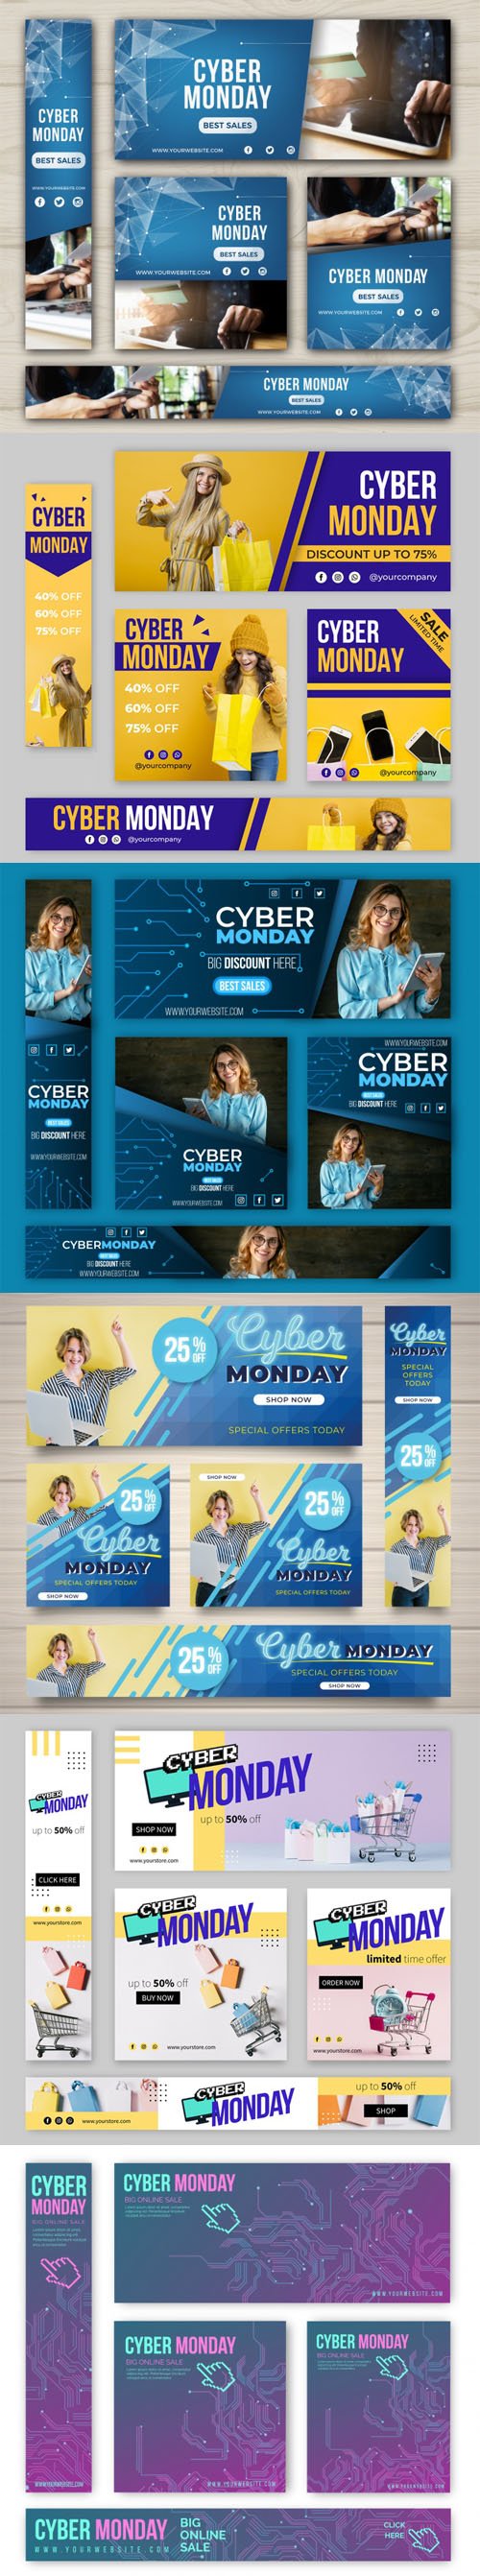 Cyber Monday 2019 Banners Vector Colletion Vol.1